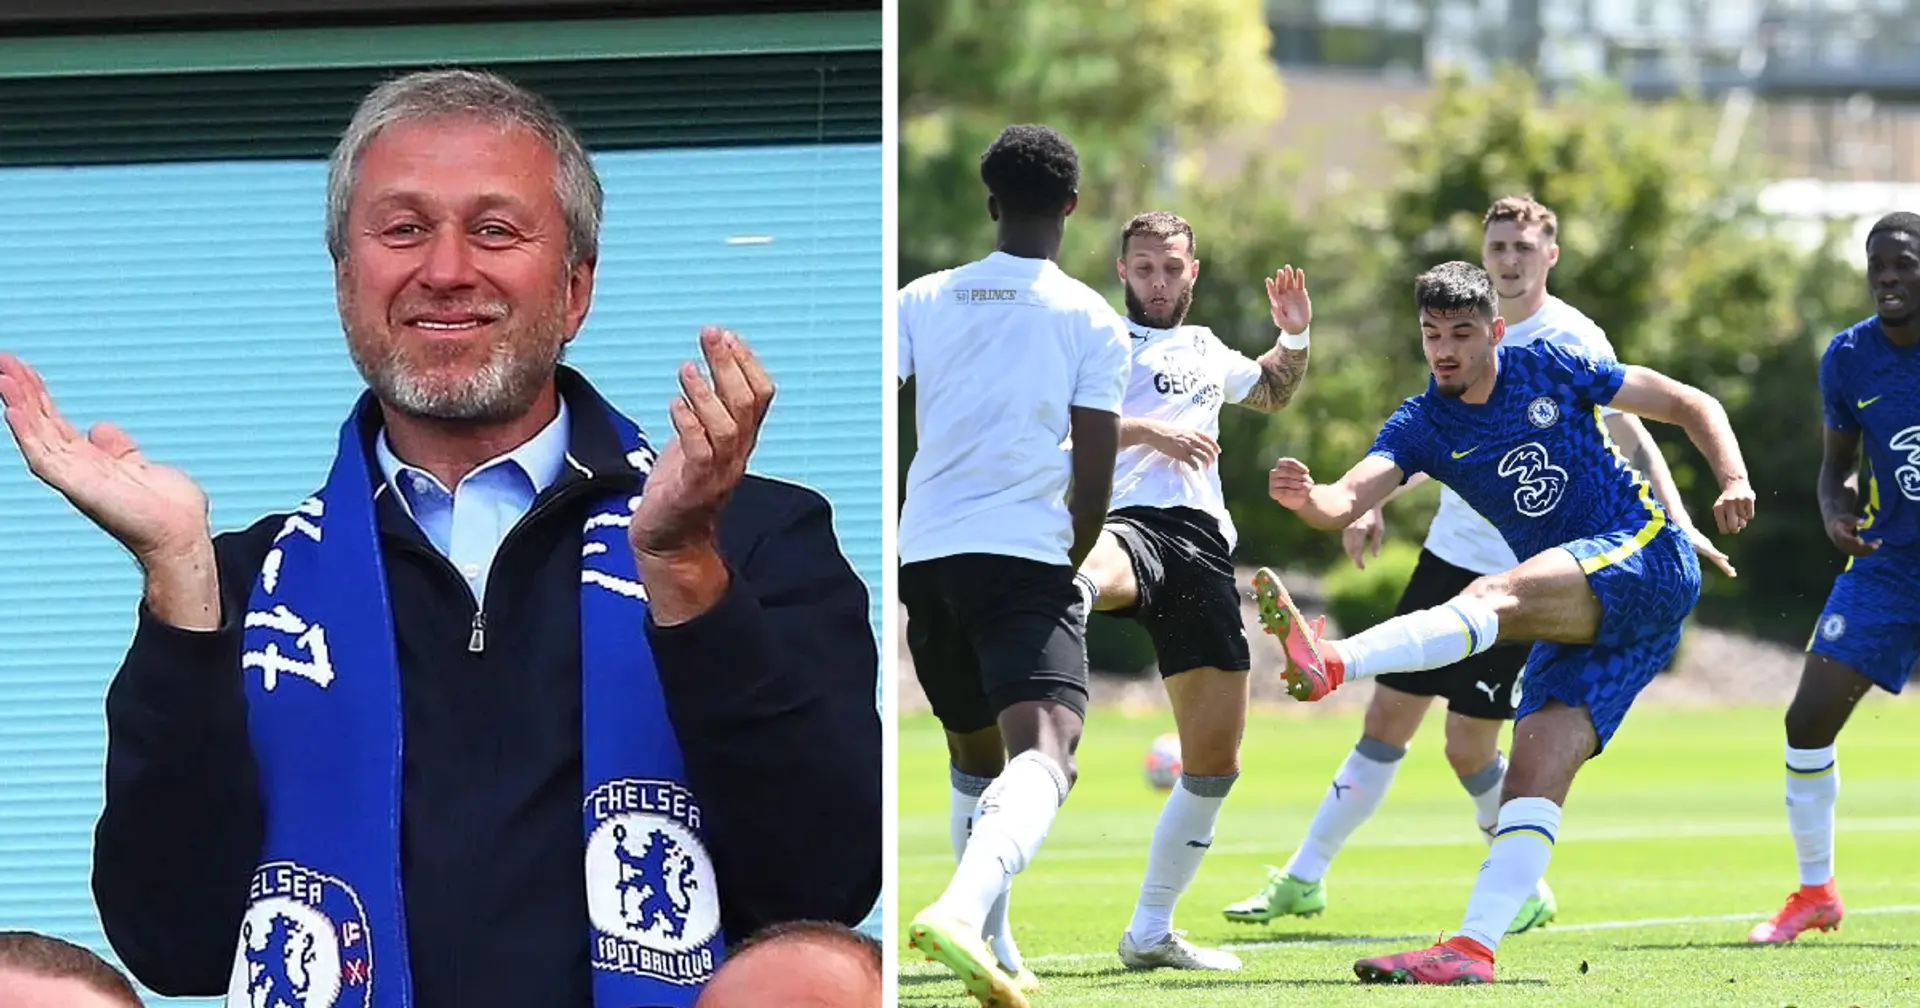 'He got starry-eyed': Peterborough owner reveals lovely story of dealing with Abramovich during friendly